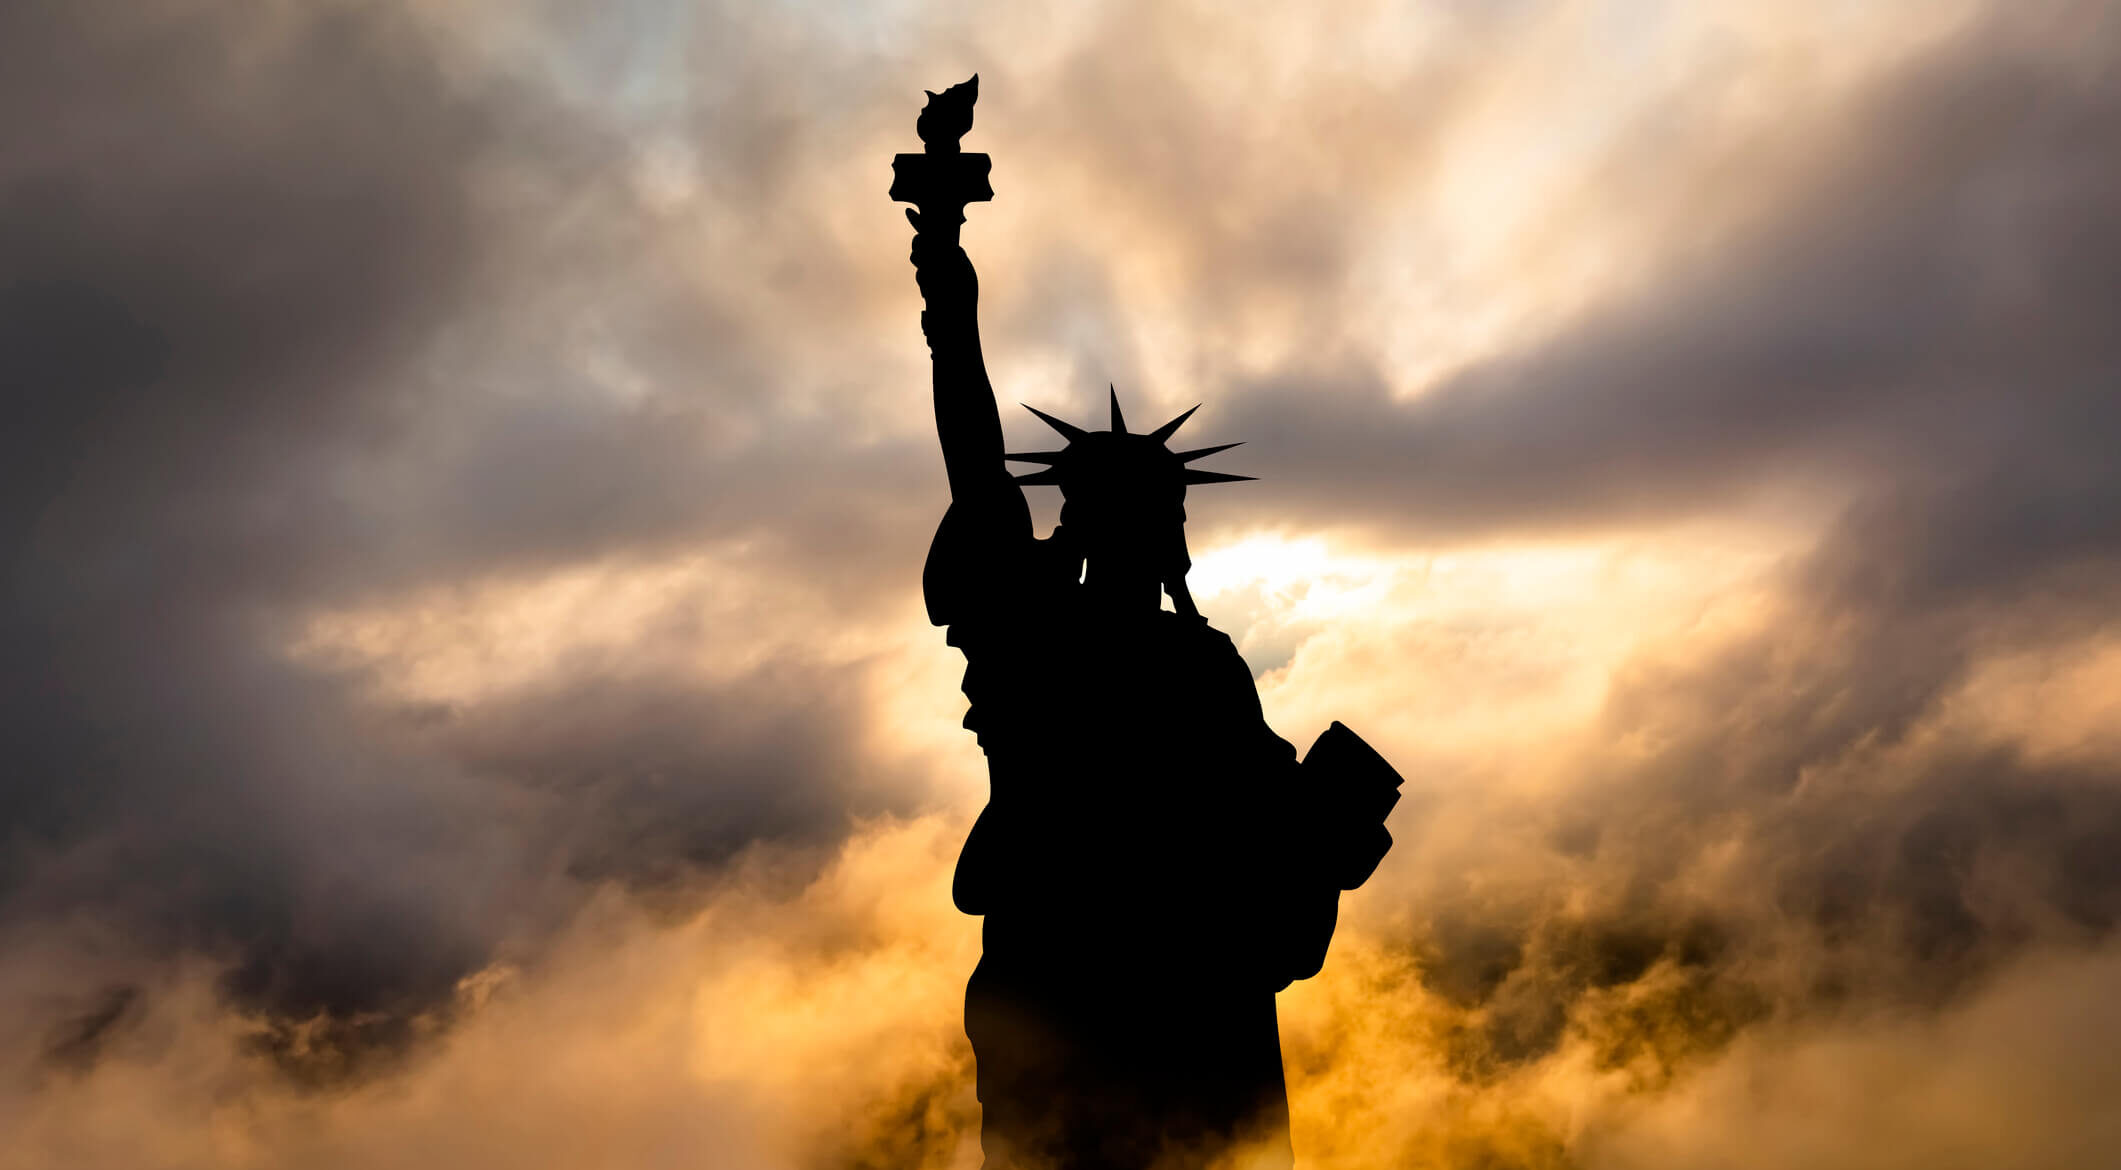 Statue of Liberty (Anton Petrus/Getty Images)